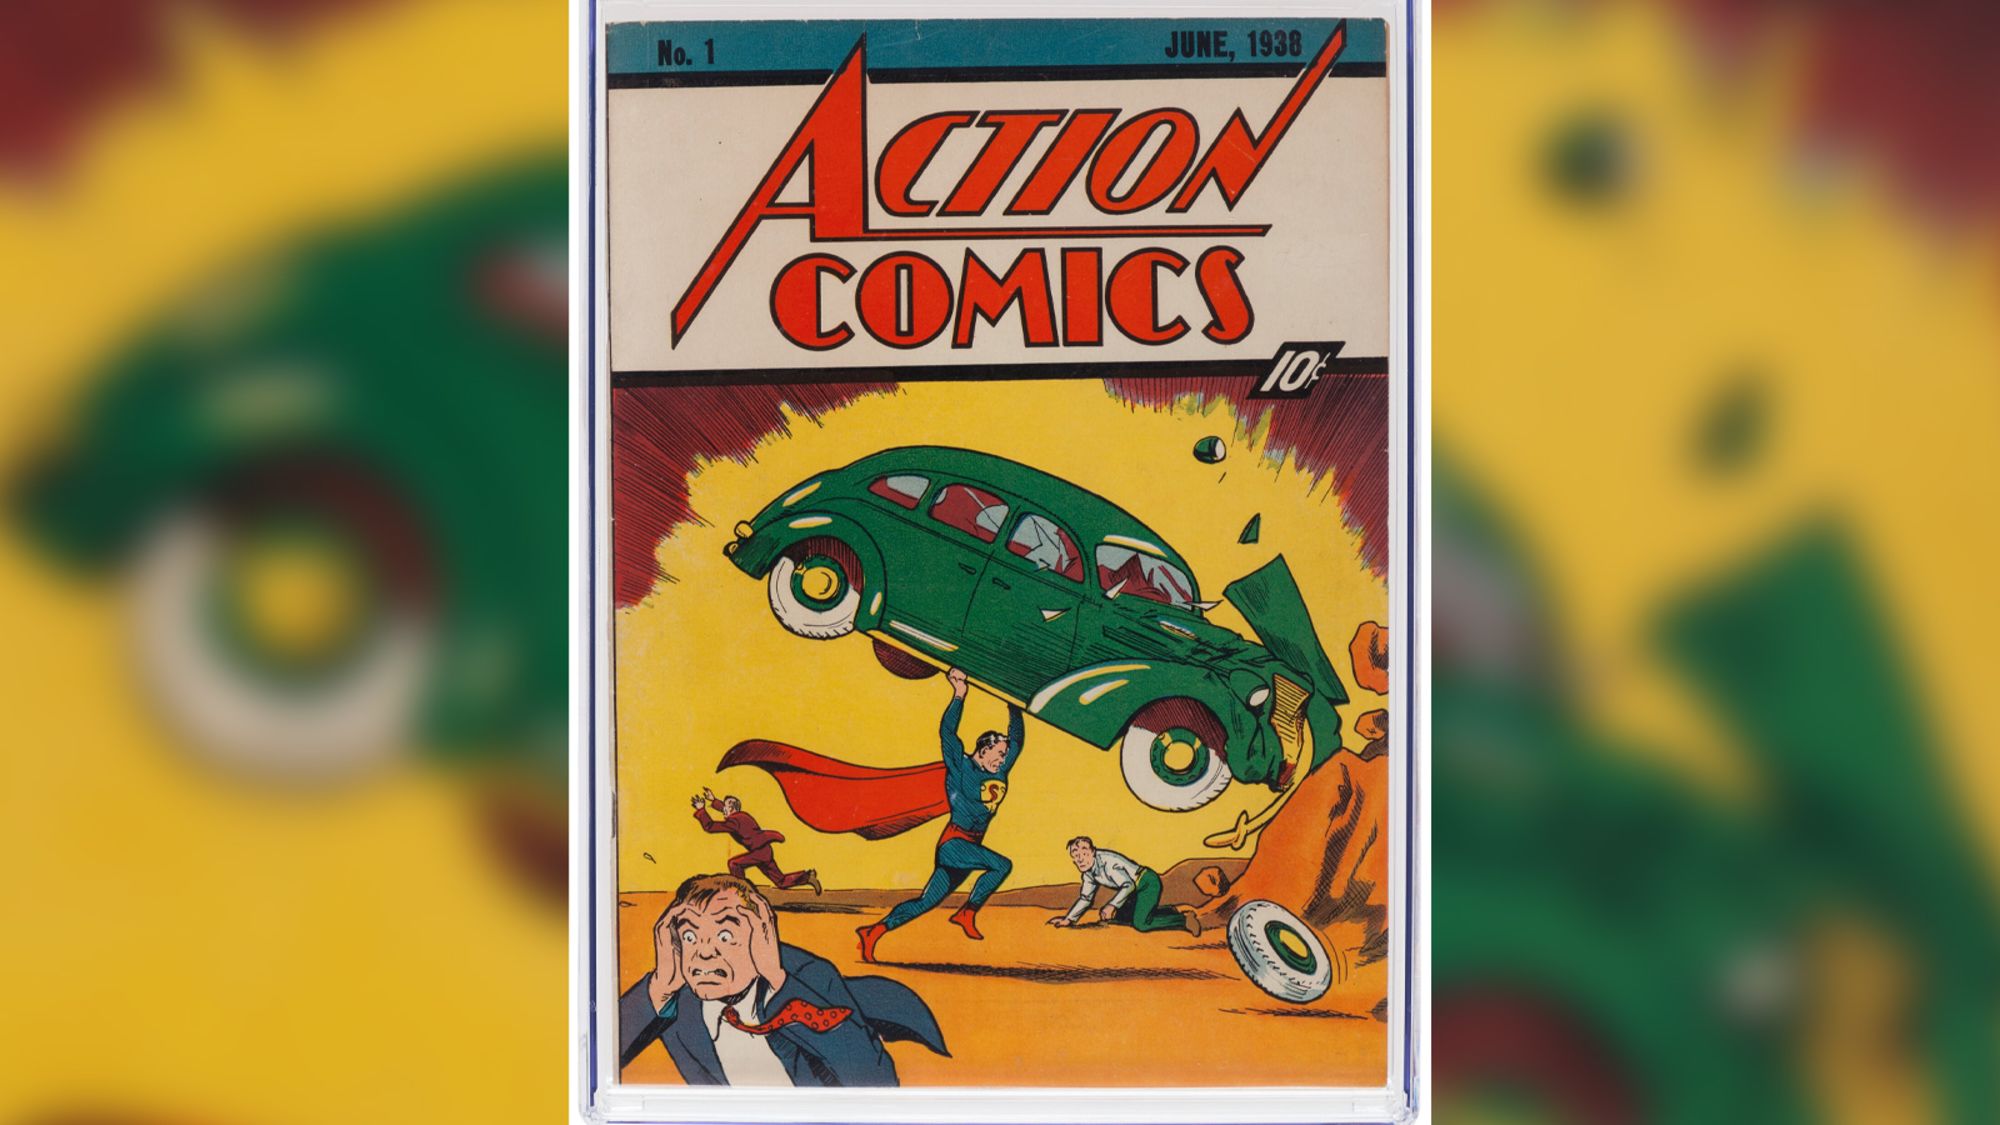 "Action Comics No. 1" is the most expensive comic ever sold.